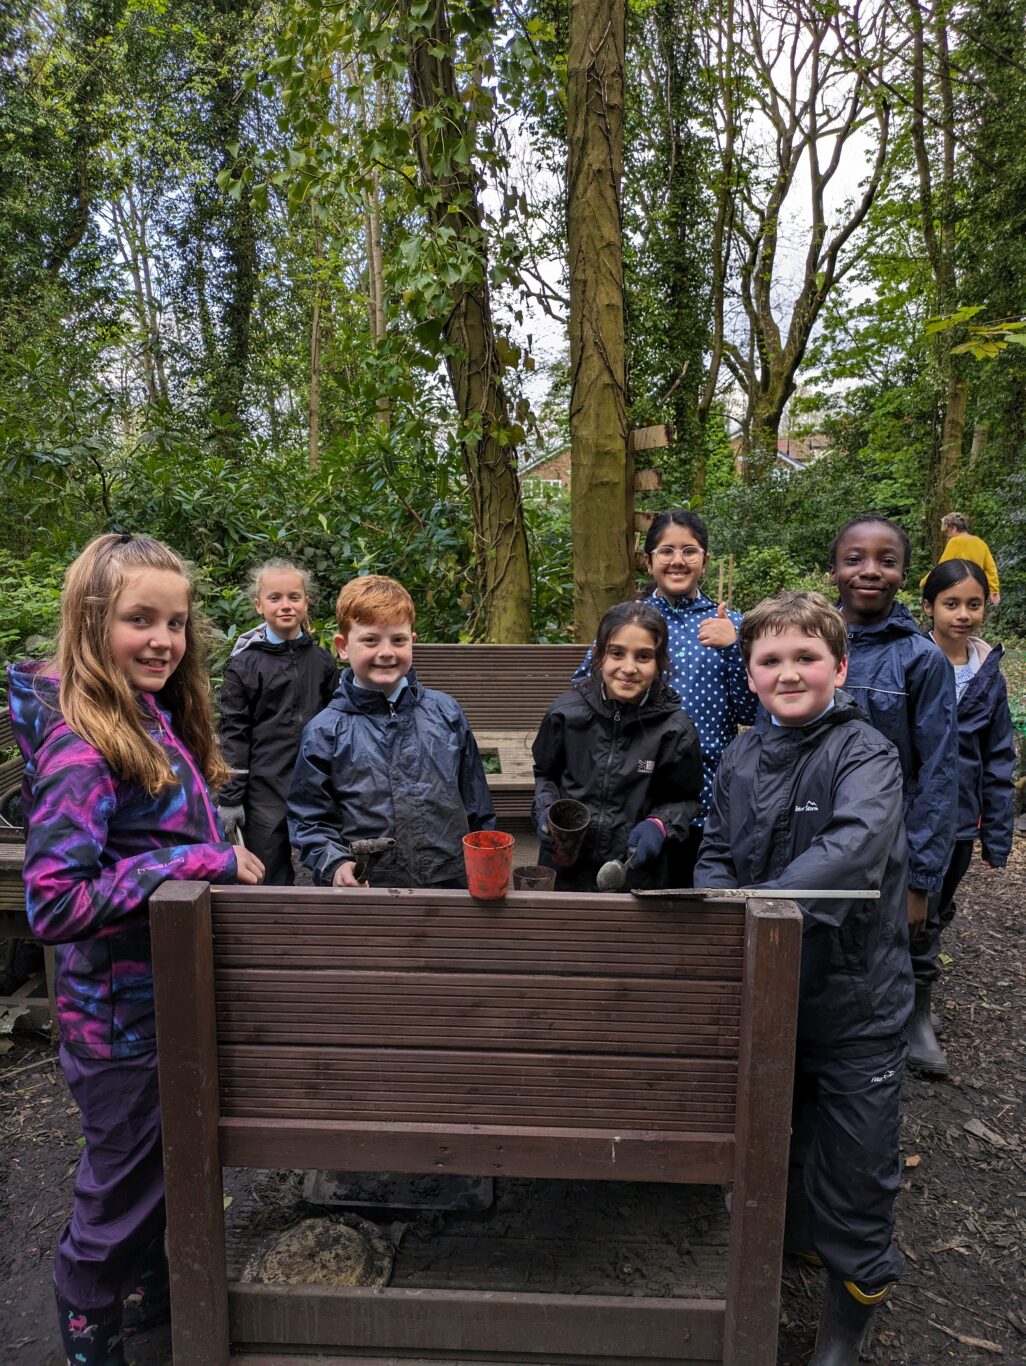 A group of Year 4 students stood together in the Forest School area